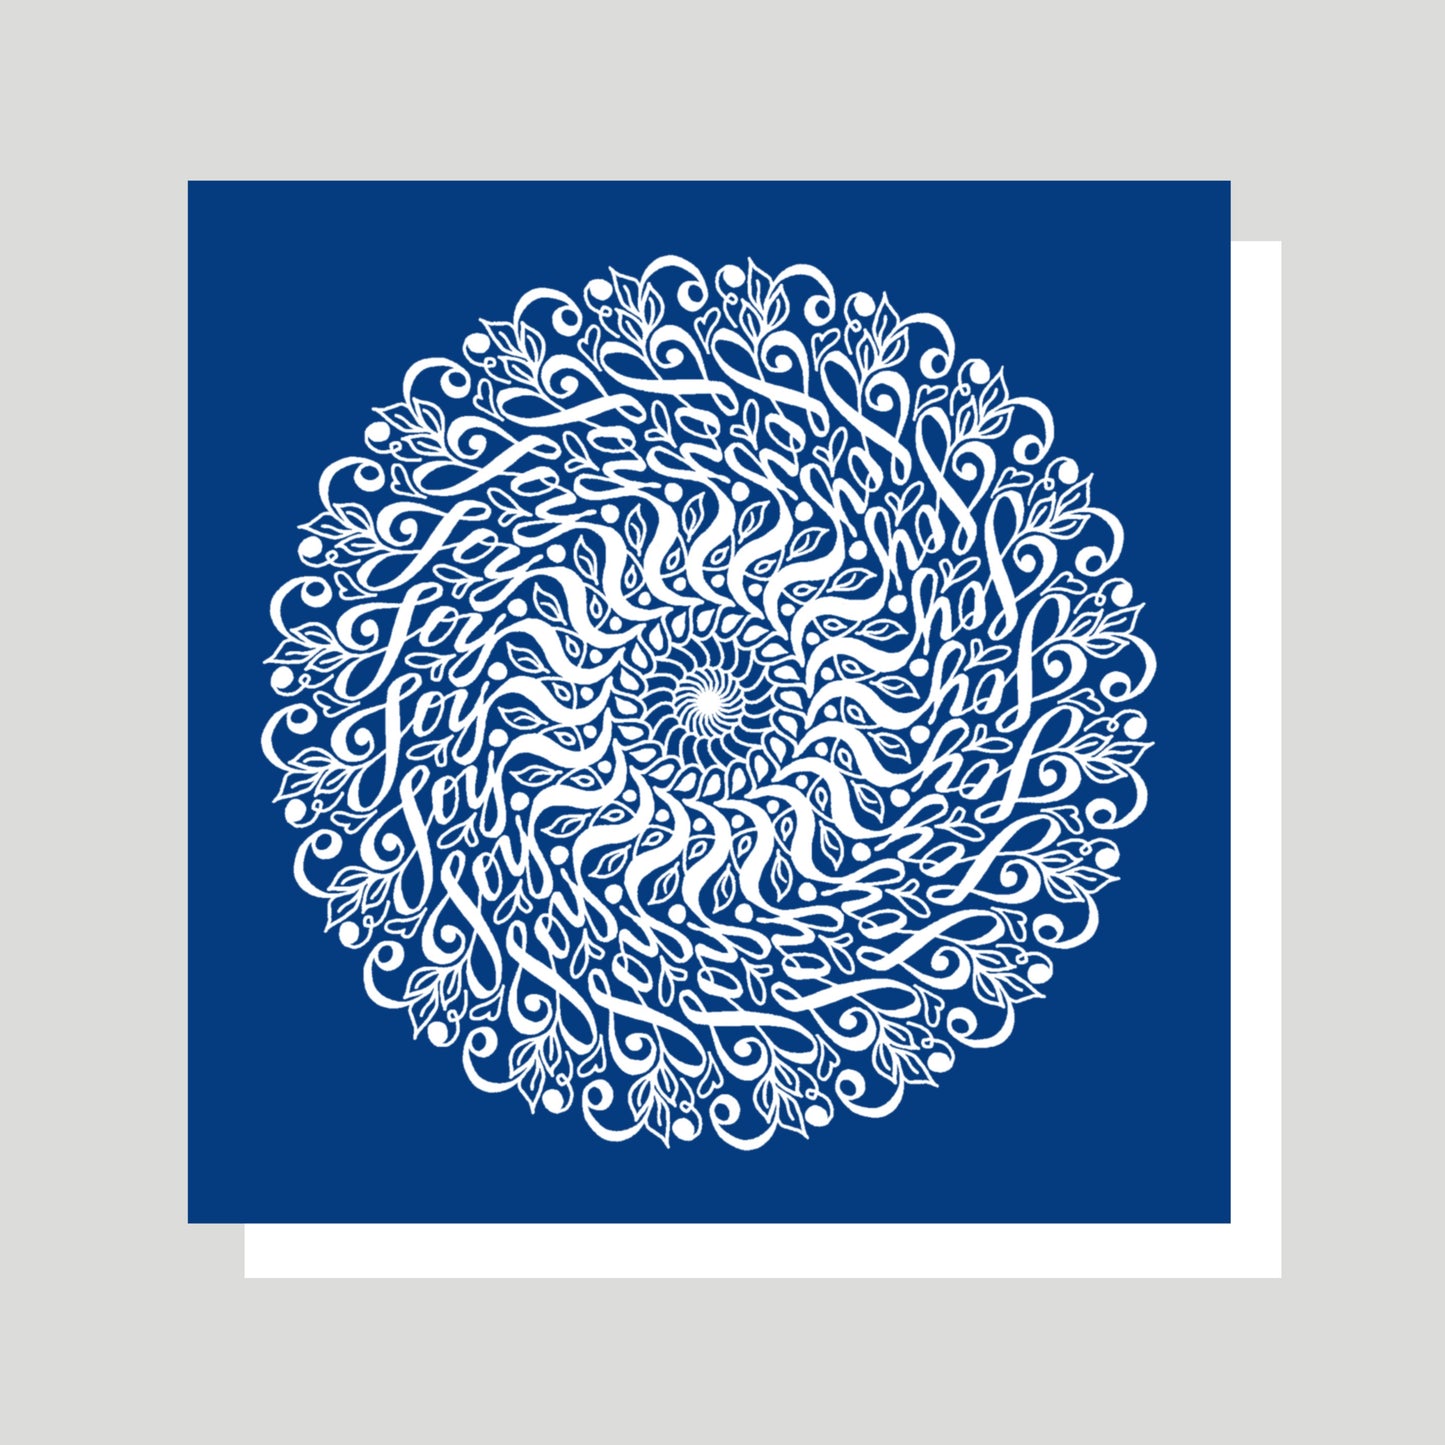 Our "Joy Mandala" greeting card is one of our best sellers and features a deep blue background and a swirling mandala with the word "Joy" hidden within the design.  You can almost get lost in the movement of this elegant pattern!  All of our cards feature the art of Jennifer Knight and are printed on high quality stock locally in Charlottesville, Va.  Newwingstudio.com